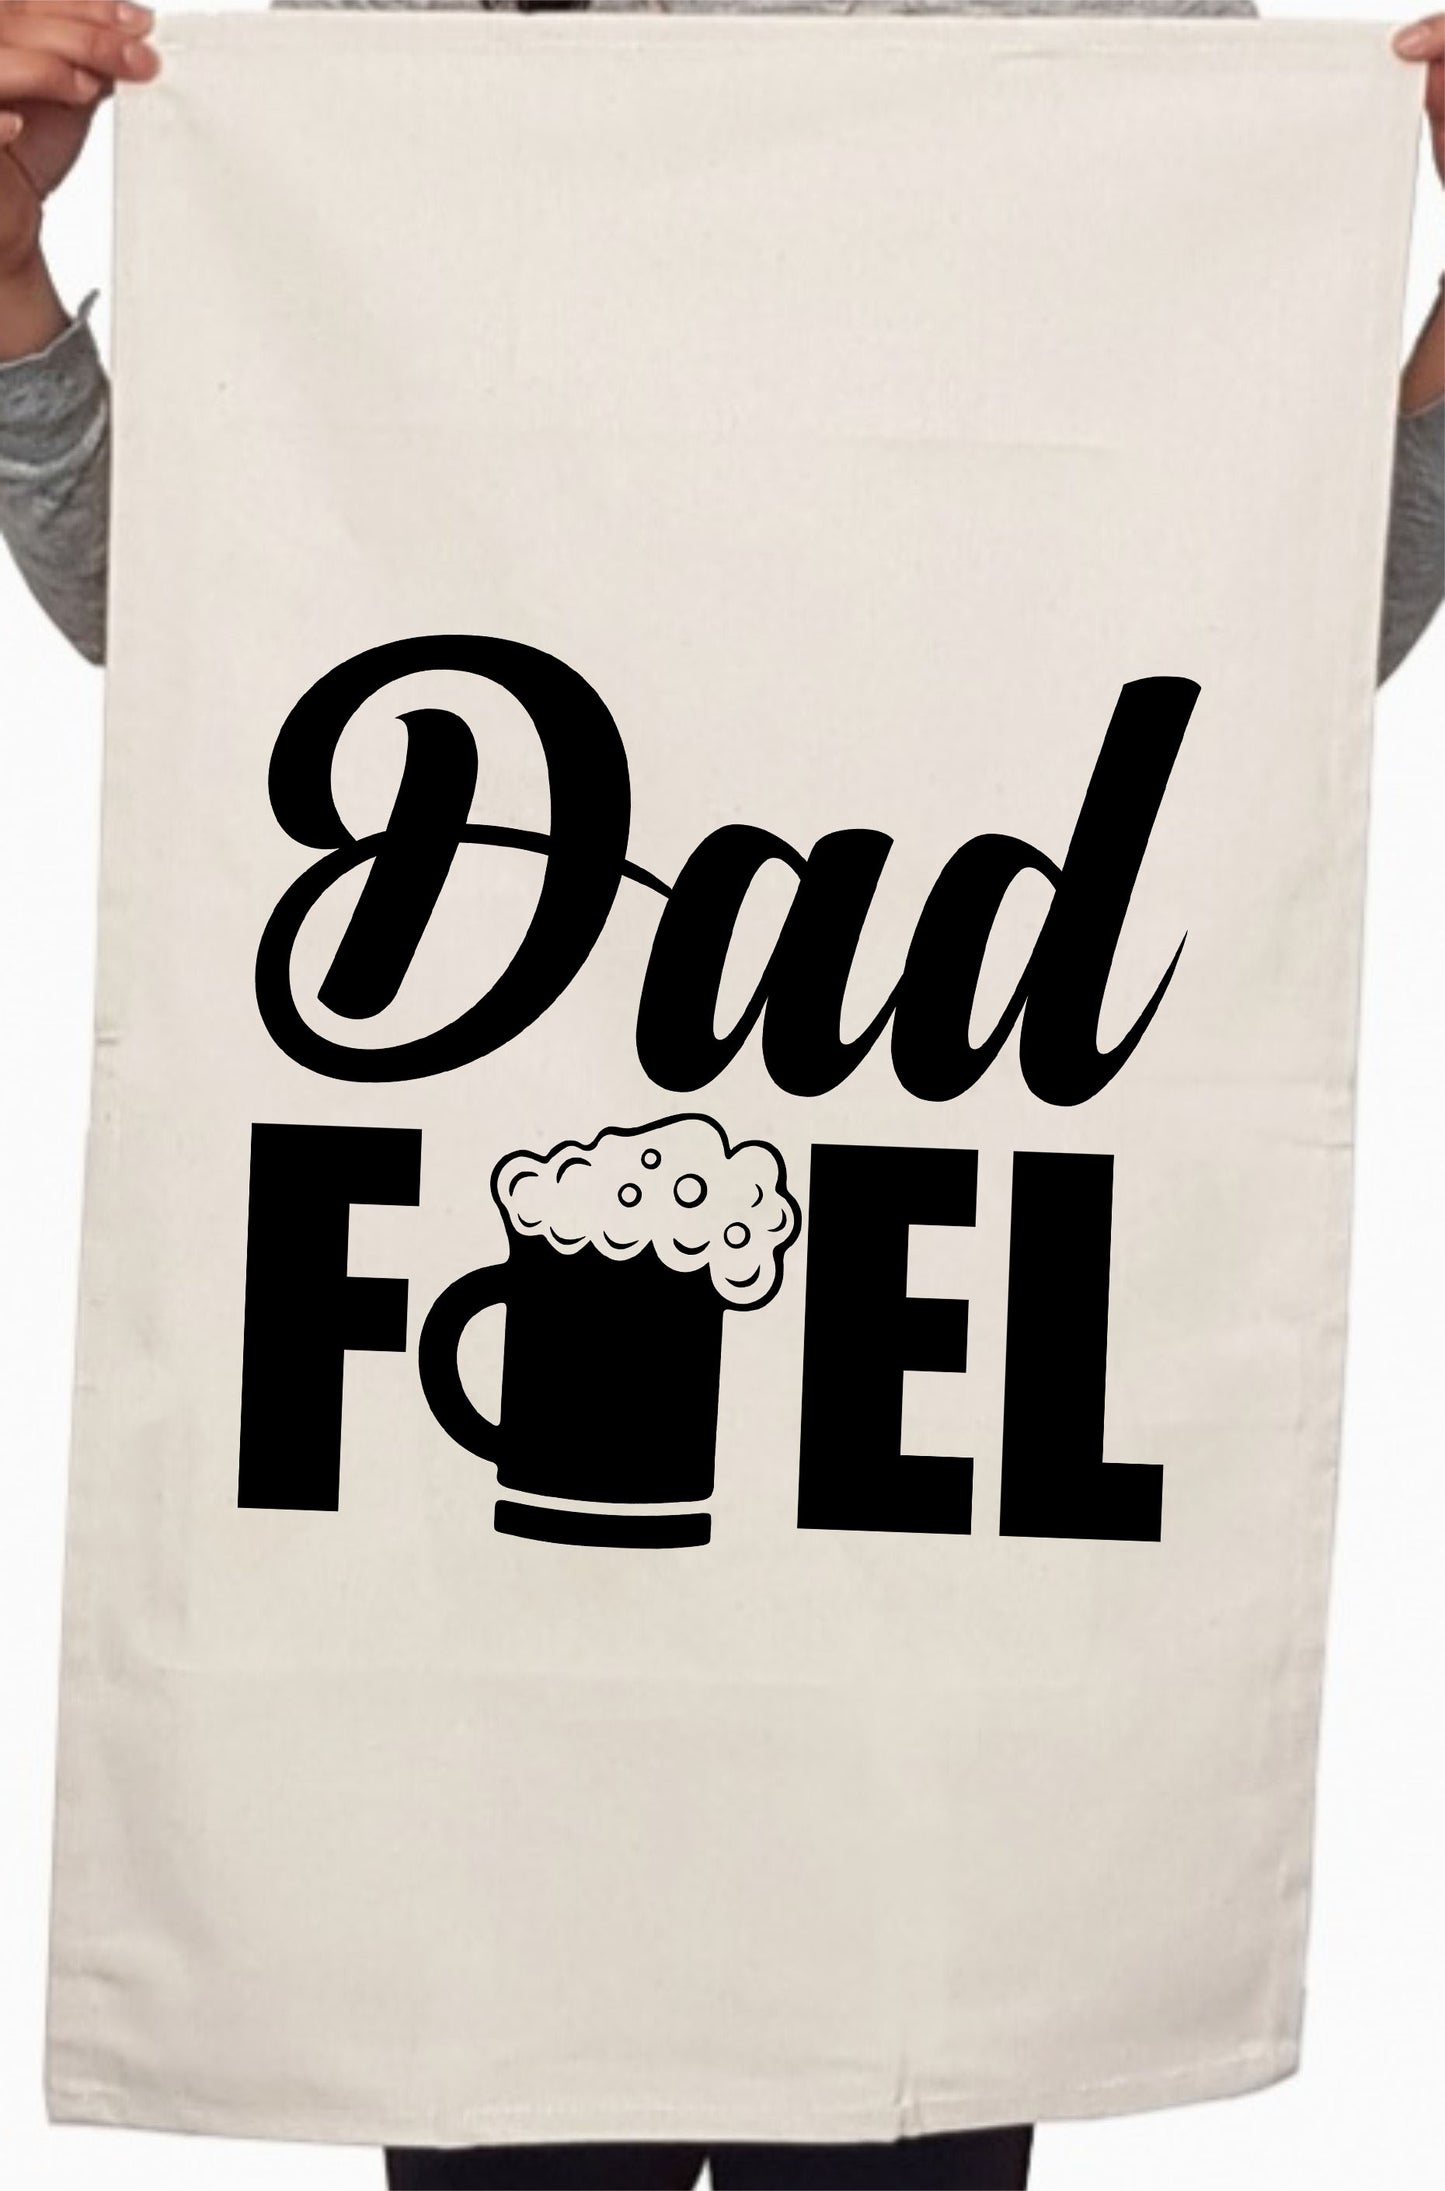 Awesome Dad Fuel Father's Day Beer Custom Kitchen Table Tea Towel